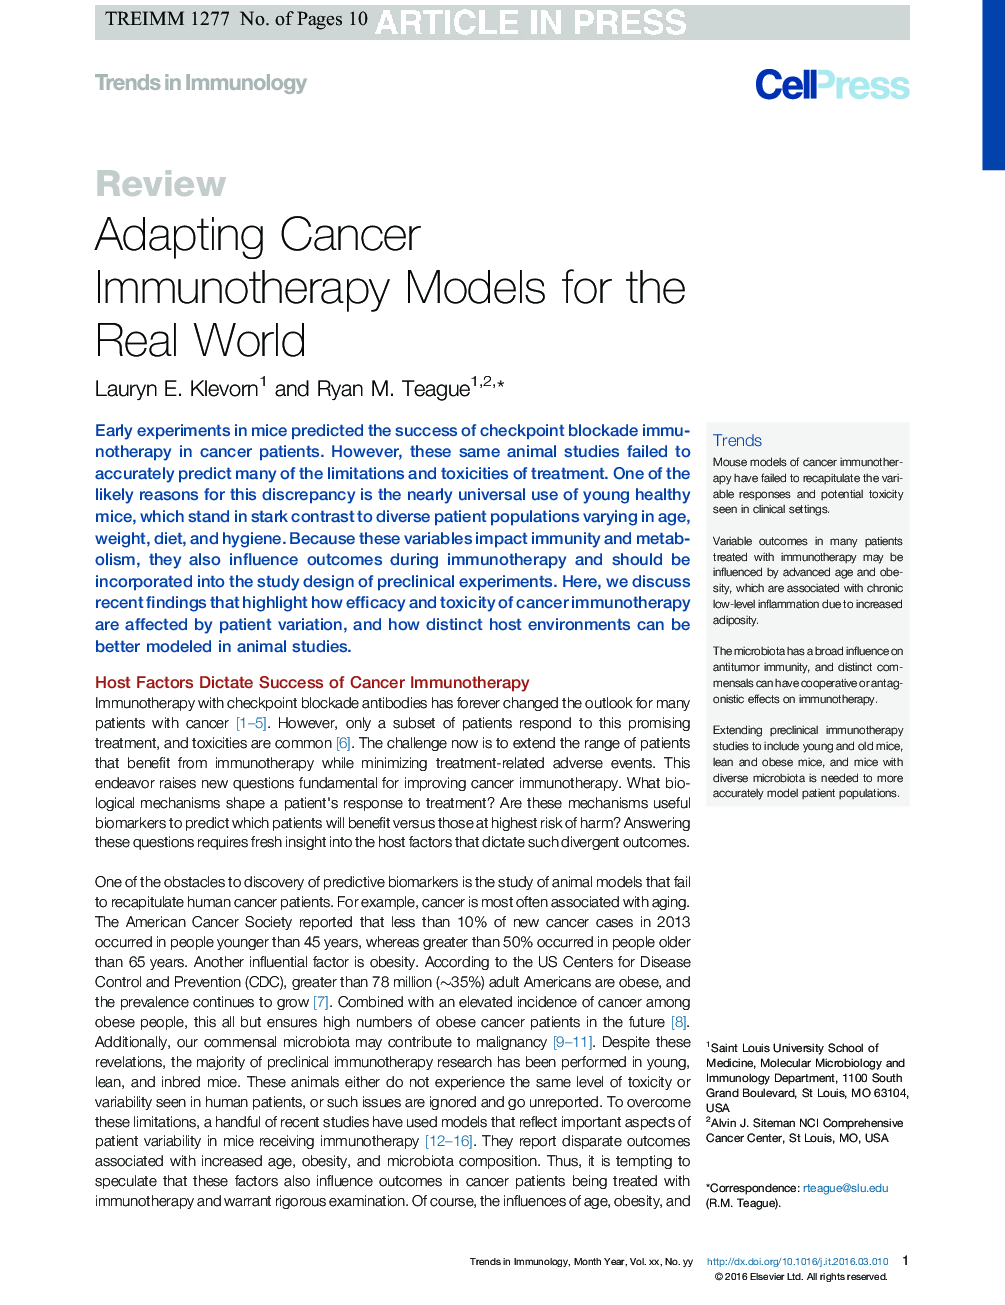 Adapting Cancer Immunotherapy Models for the Real World